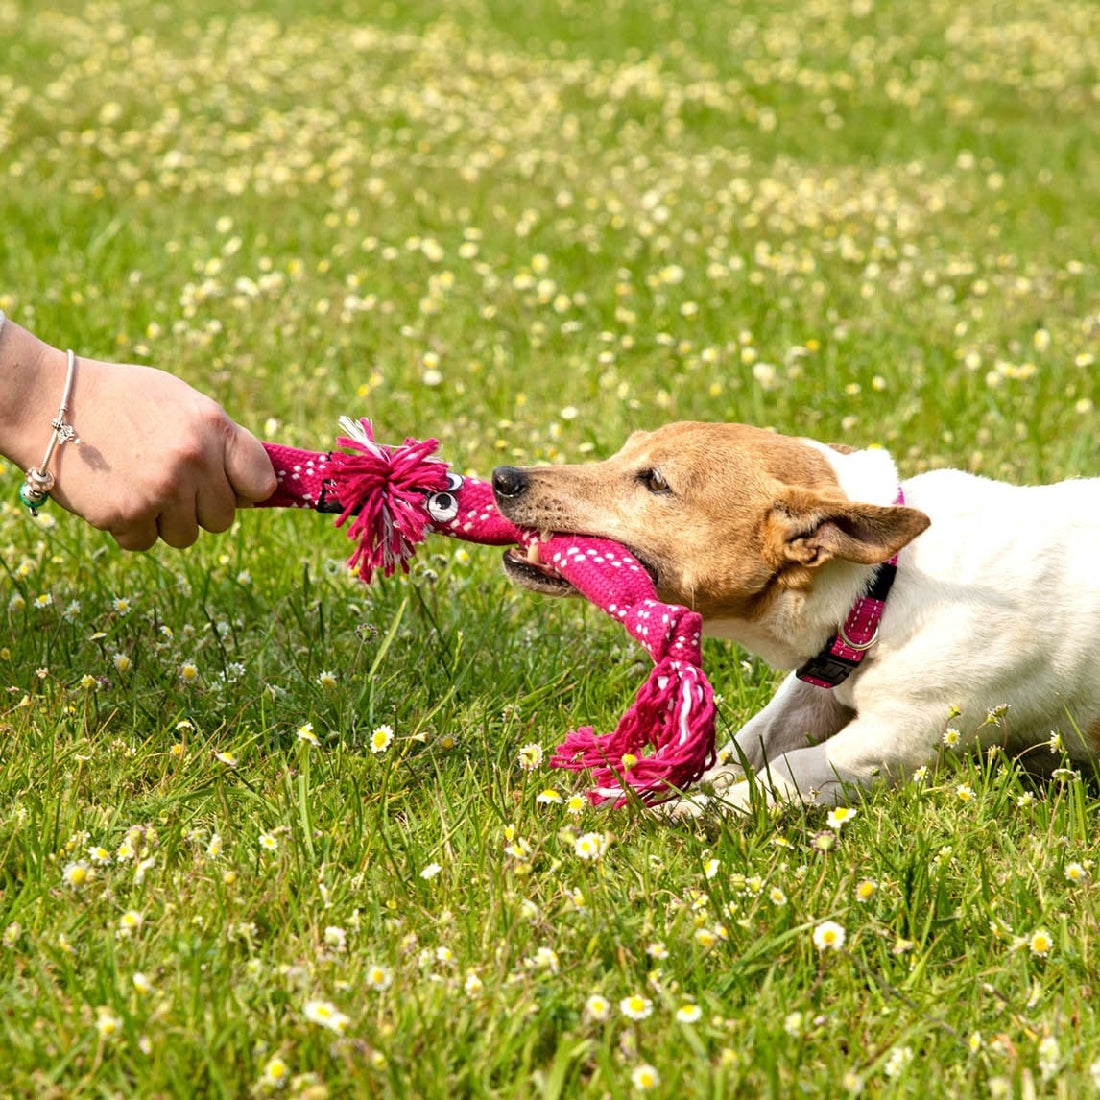 Dog plays tug-of-war with a Rogz toy in grass field.